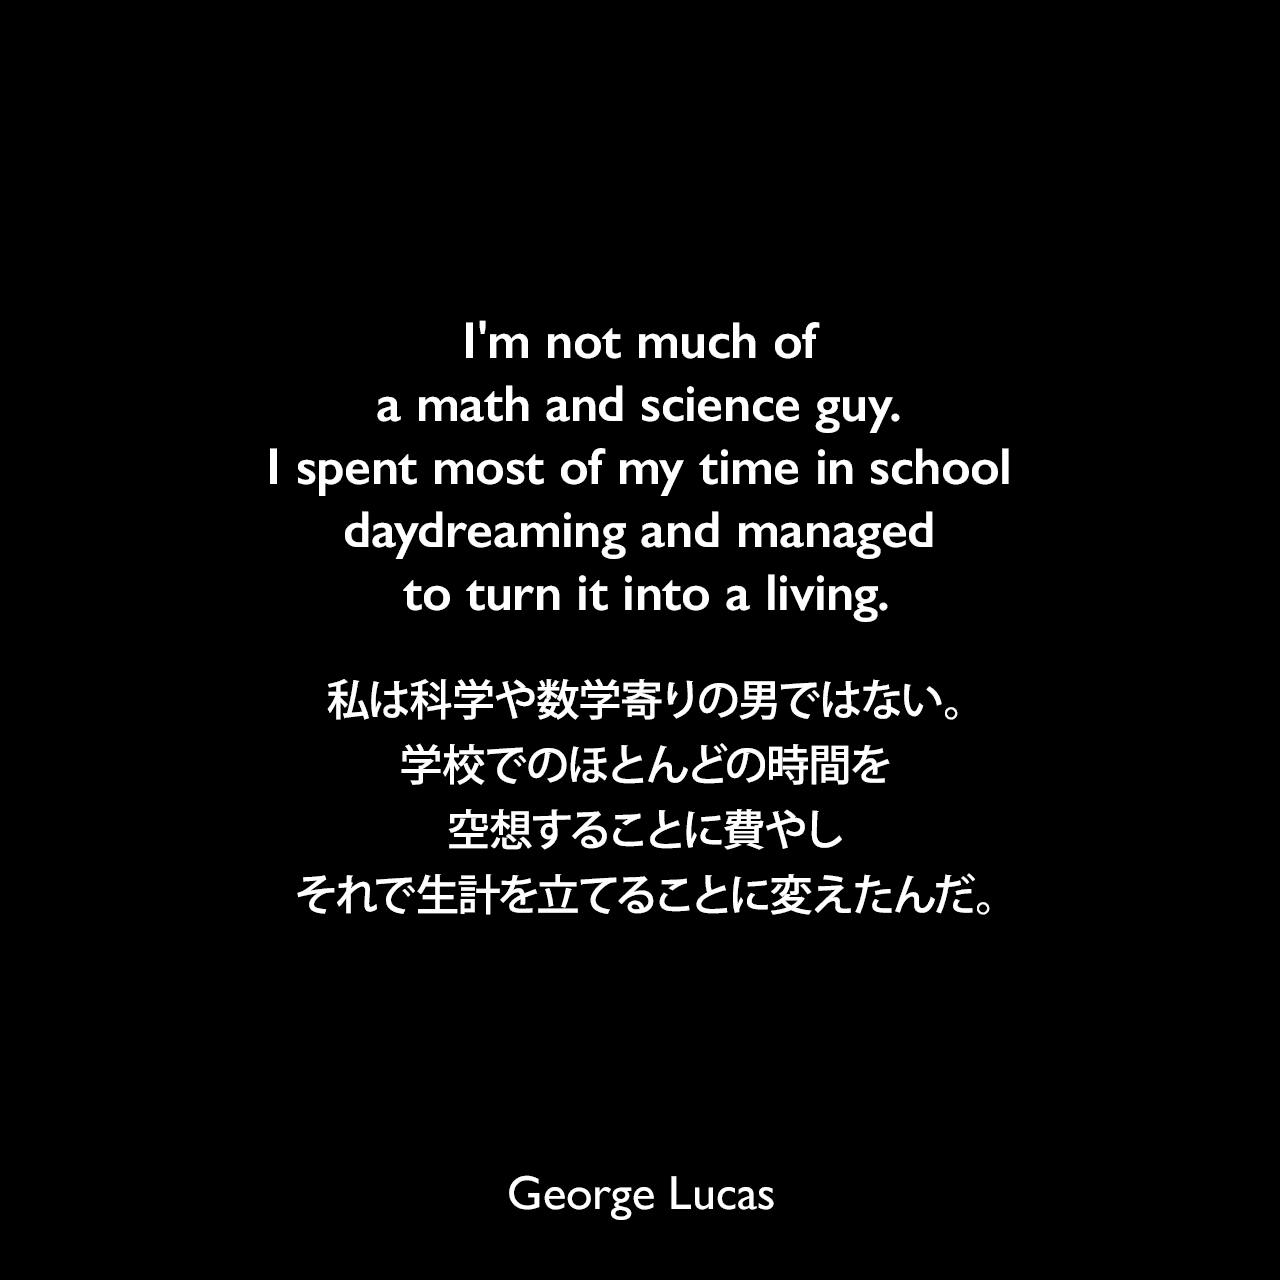 I'm not much of a math and science guy. I spent most of my time in school daydreaming and managed to turn it into a living.私は科学や数学寄りの男ではない。学校でのほとんどの時間を空想することに費やし、それで生計を立てることに変えたんだ。George Lucas